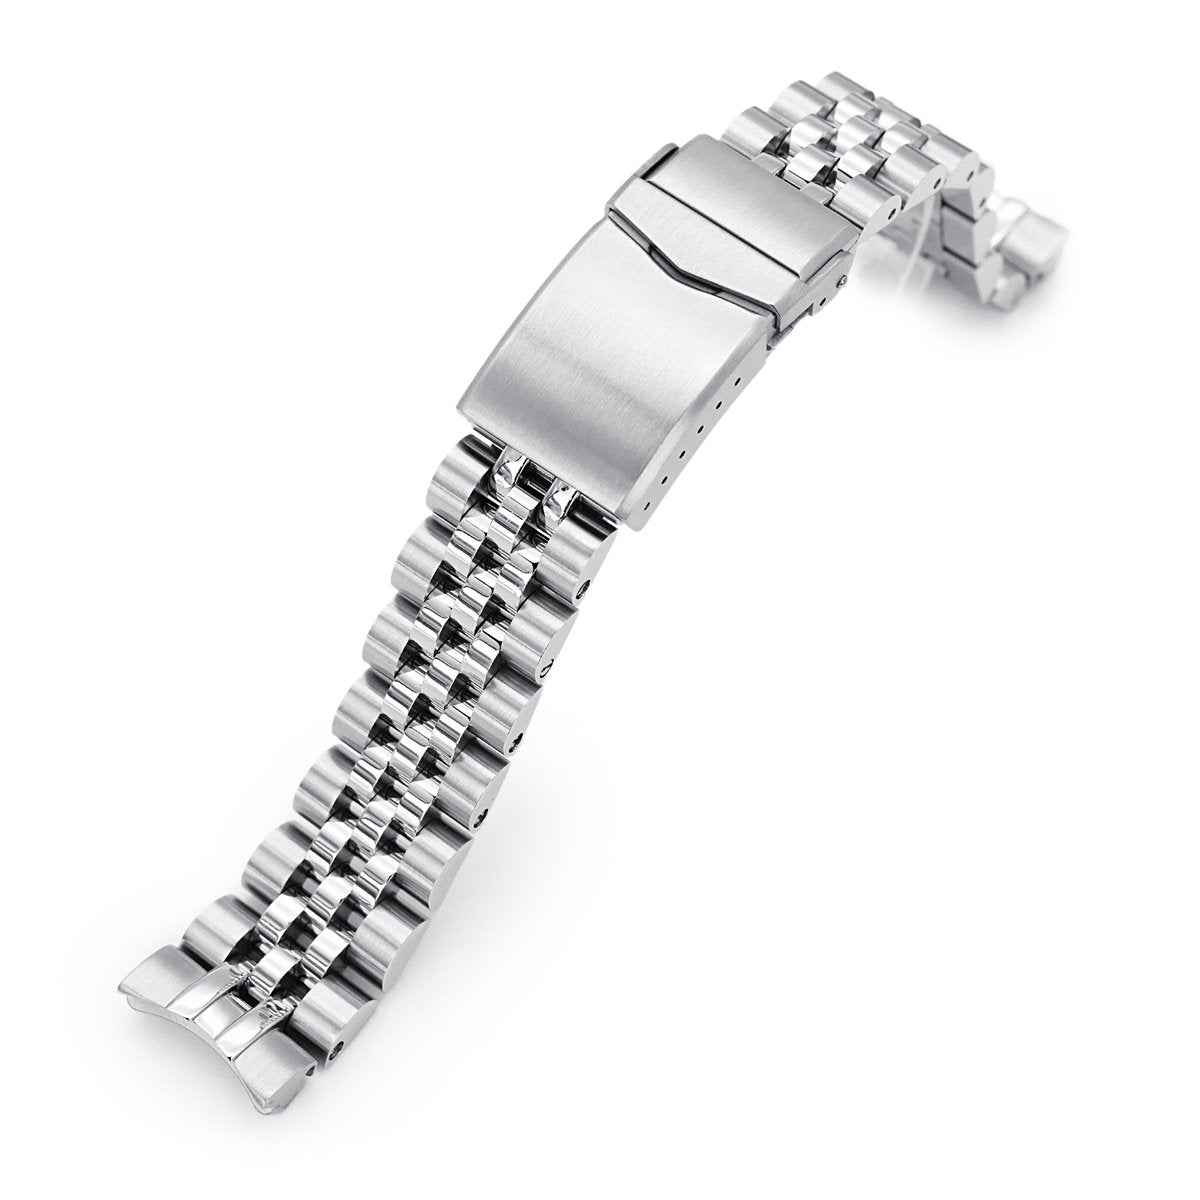  MiLTAT 22mm Watch Band for Seiko Turtle SRP773 SRP775 SRP777  SRPA21, Endmill Screw-Link : Clothing, Shoes & Jewelry